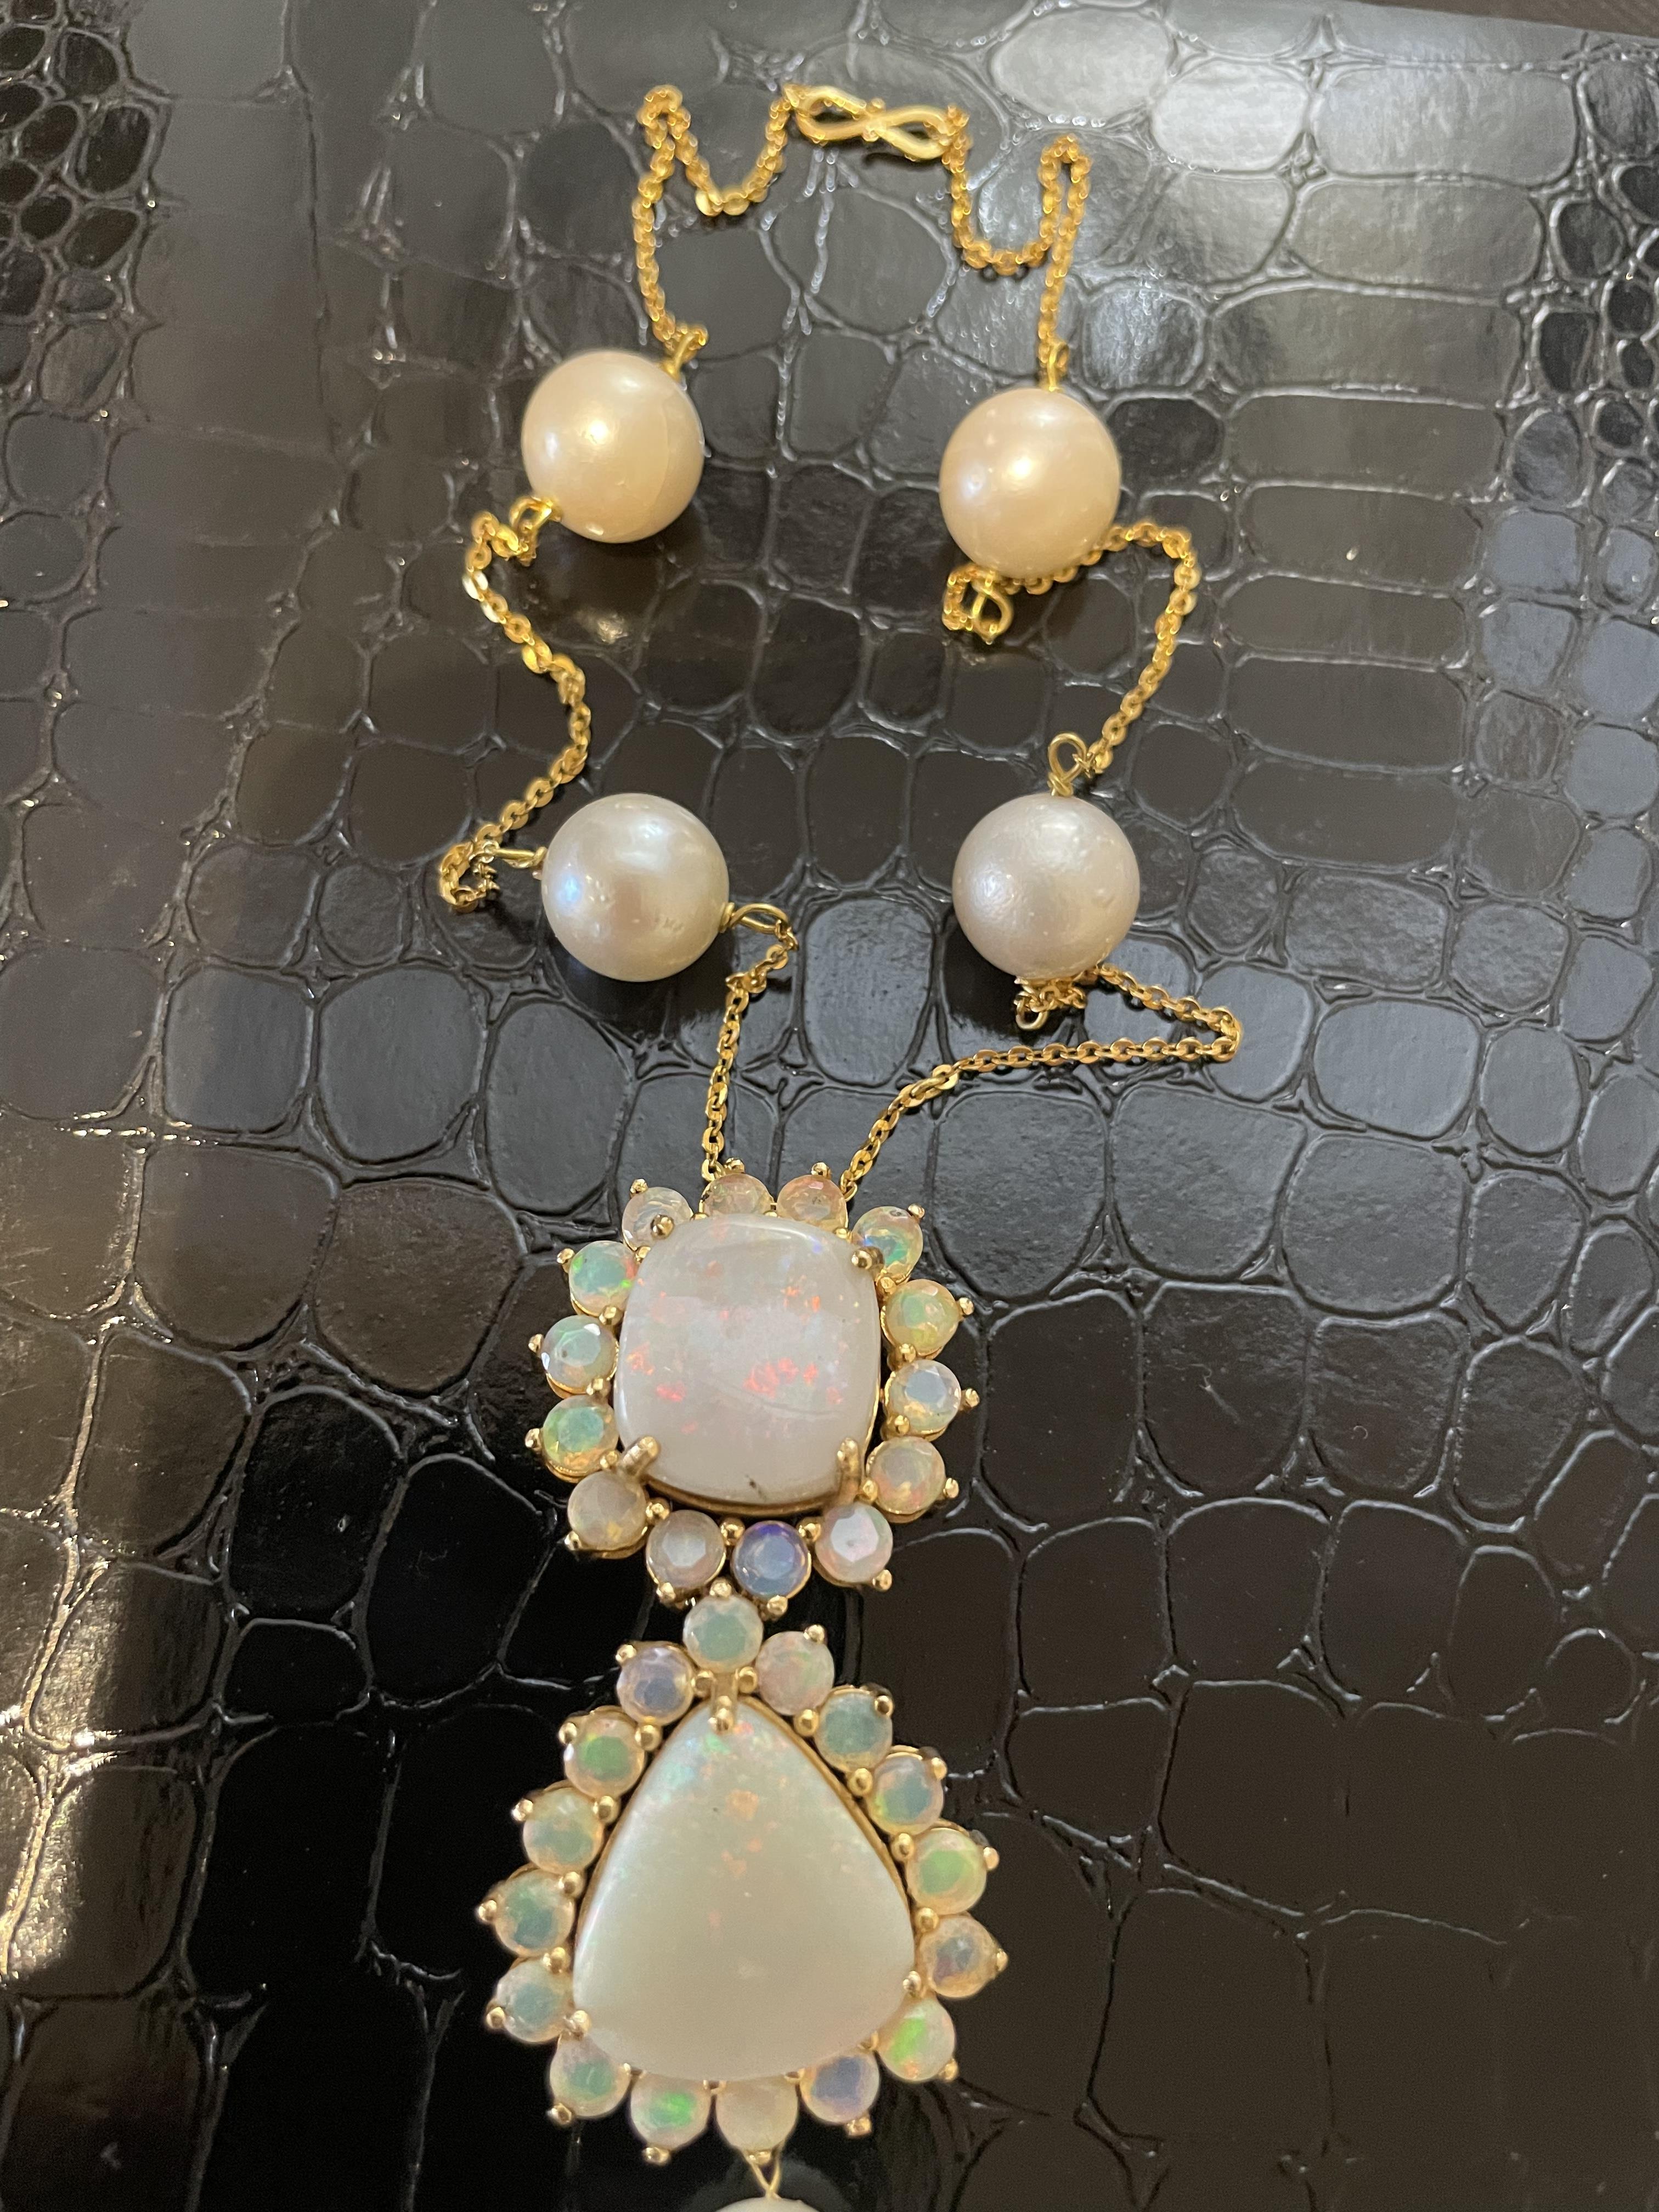 Beautiful 25ct Australian opal Necklace w 52ct South sea Pearls and 18k gold - Image 6 of 6